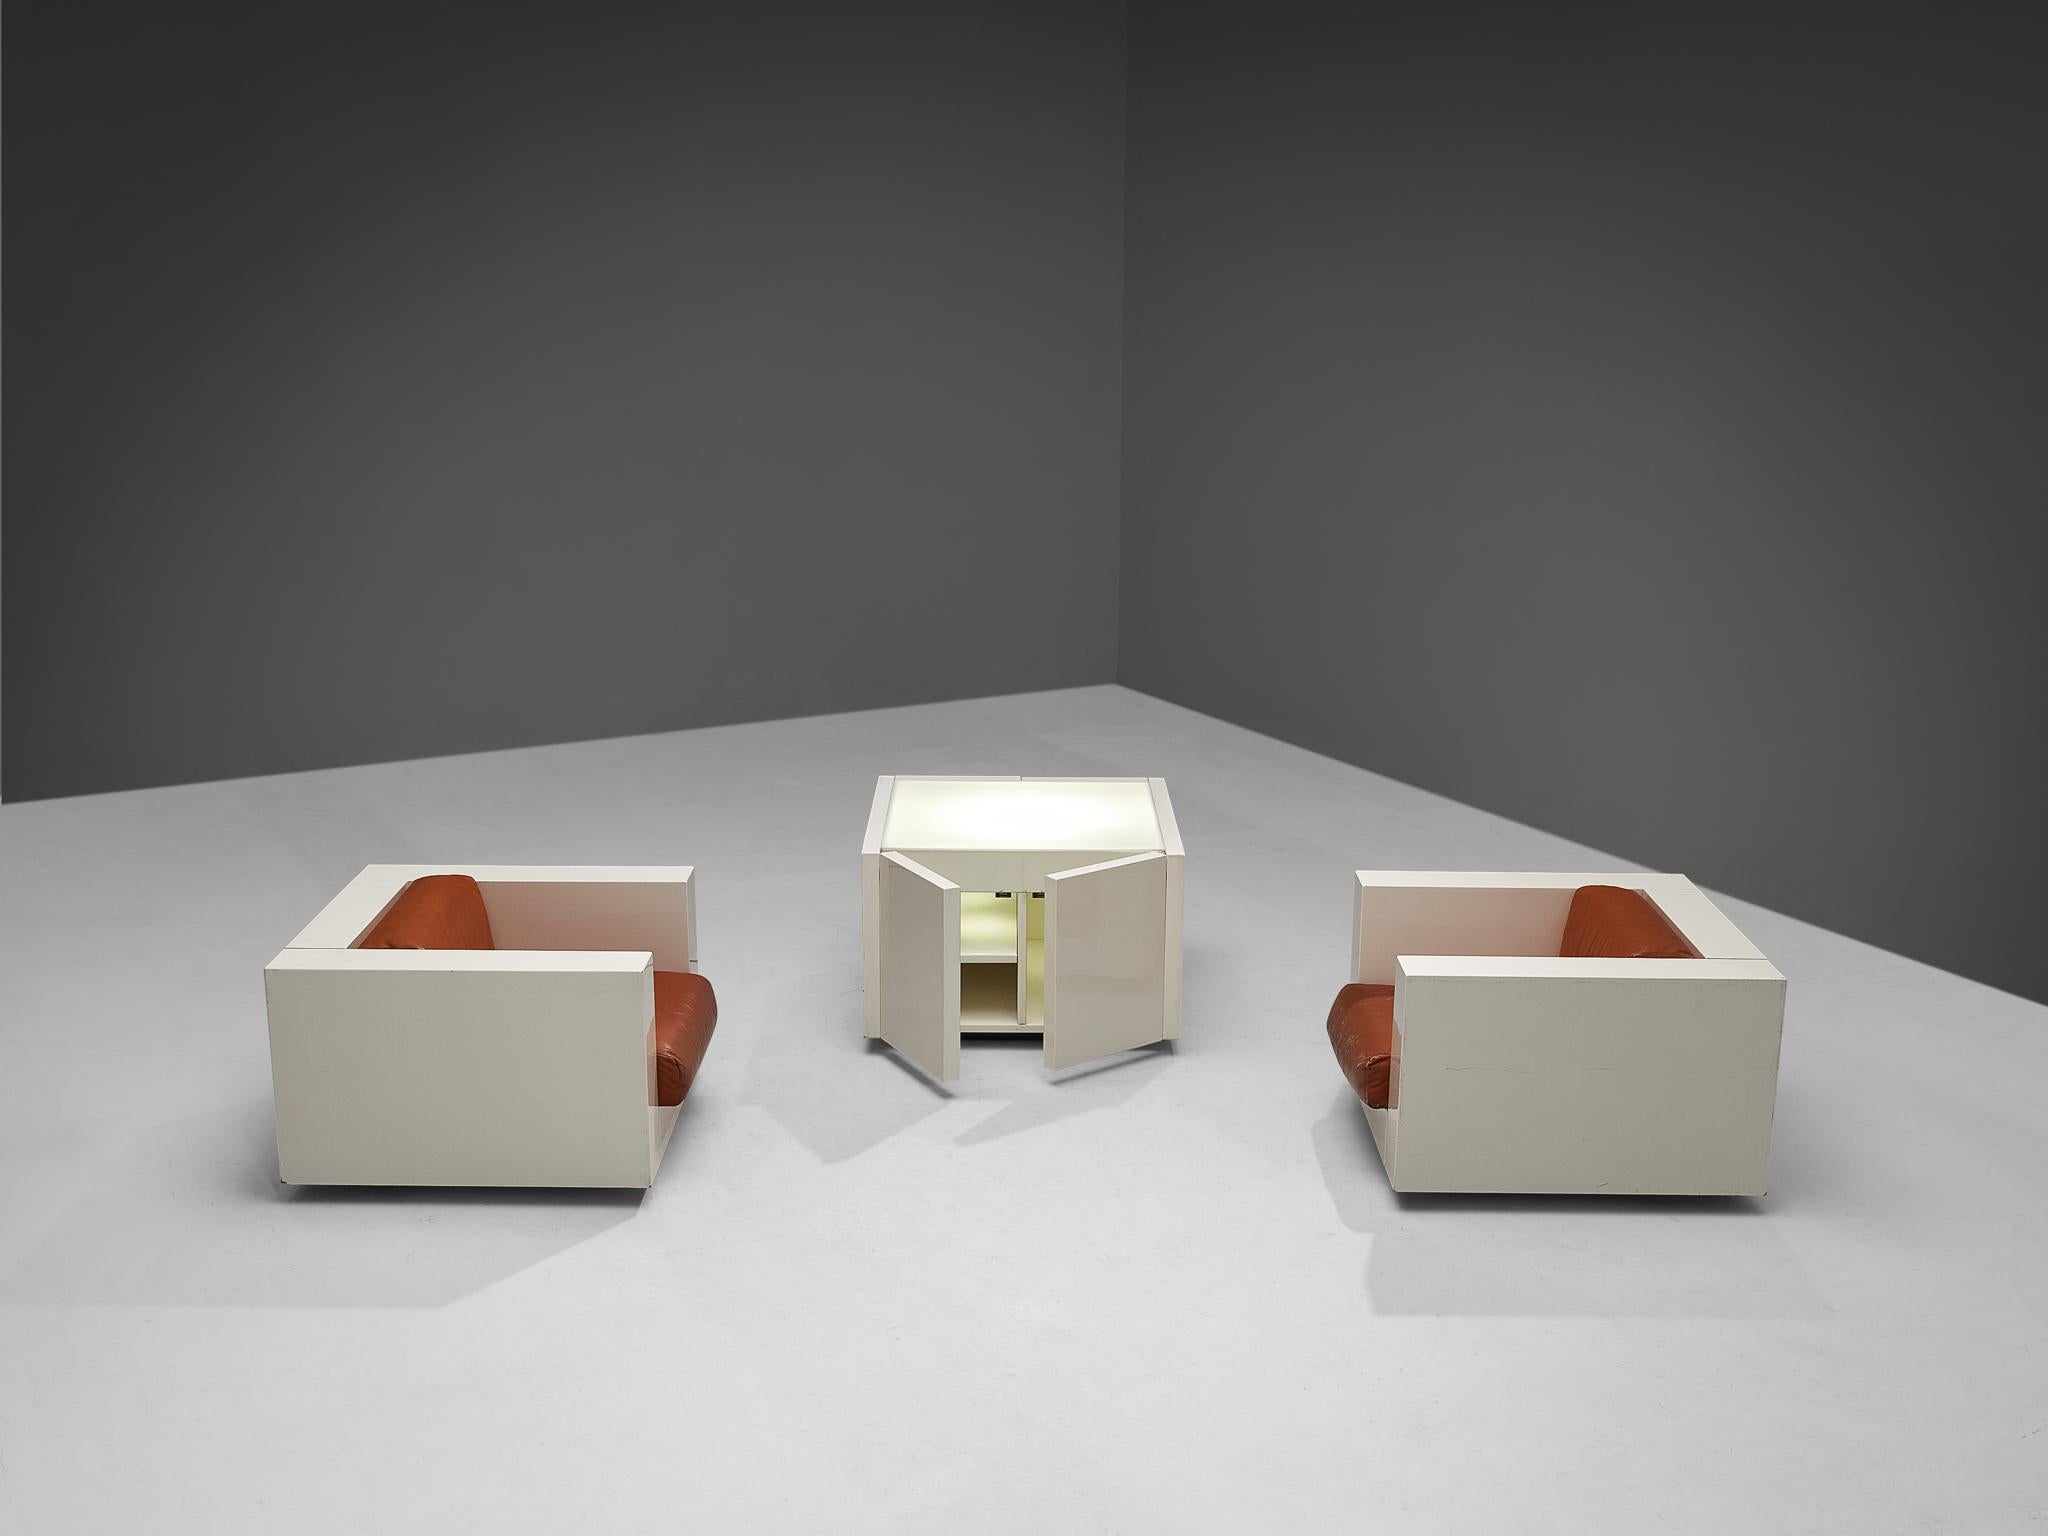 Leather Massimo and Lella Vignelli for Poltronova Pair of Lounge Chairs with Light Table